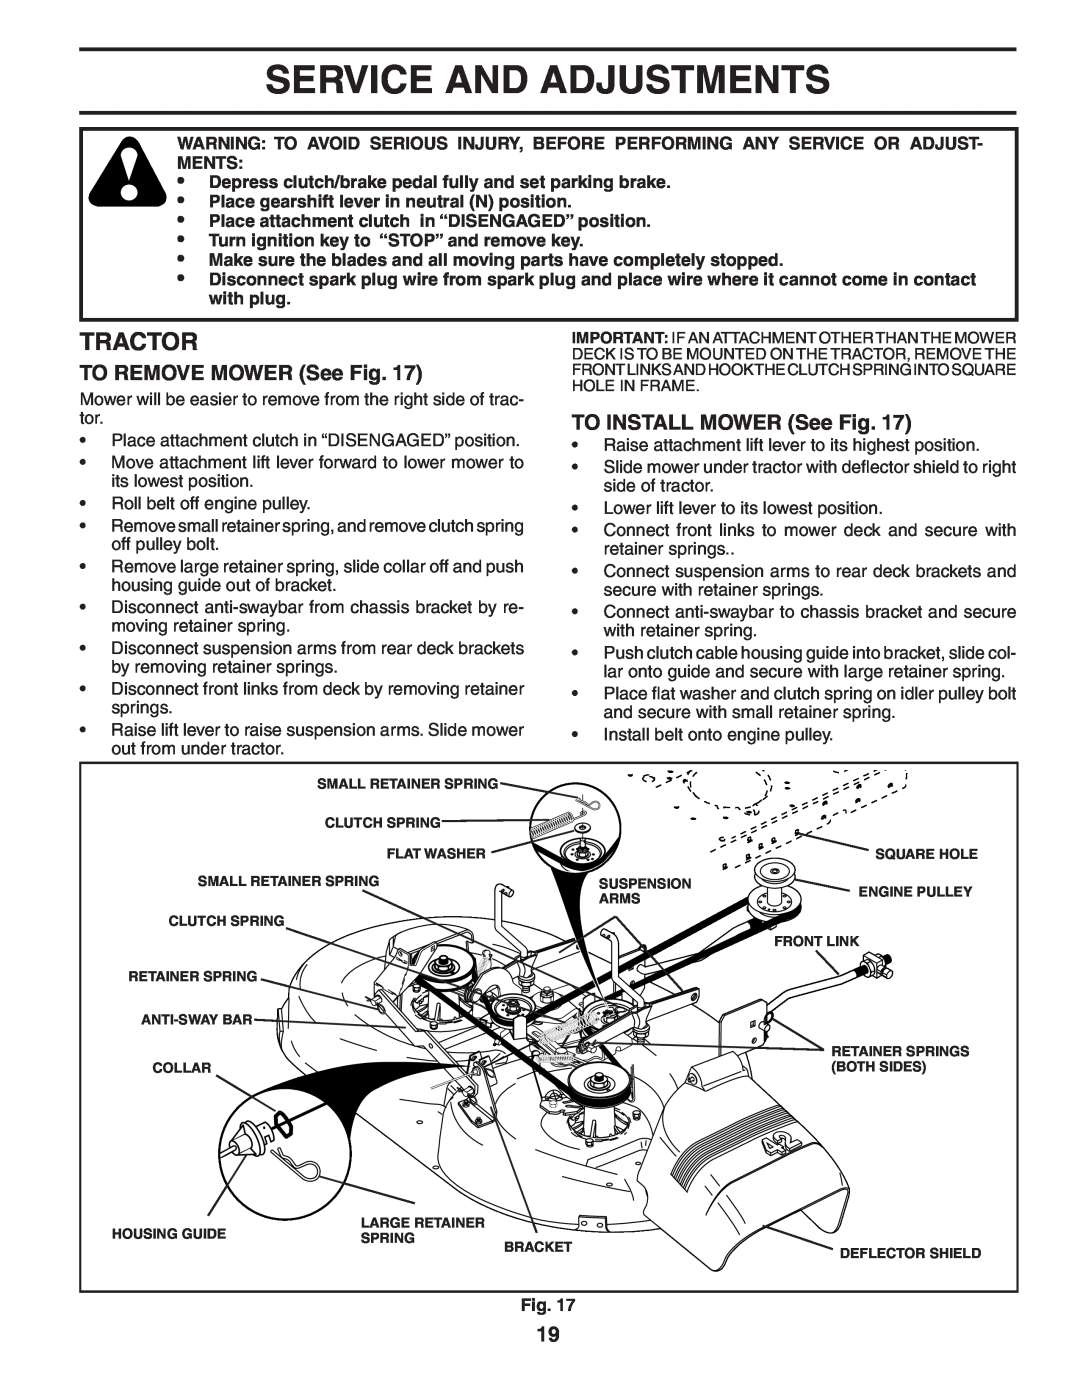 Poulan 185491, 954569707 owner manual Service And Adjustments, TO REMOVE MOWER See Fig, TO INSTALL MOWER See Fig, Tractor 